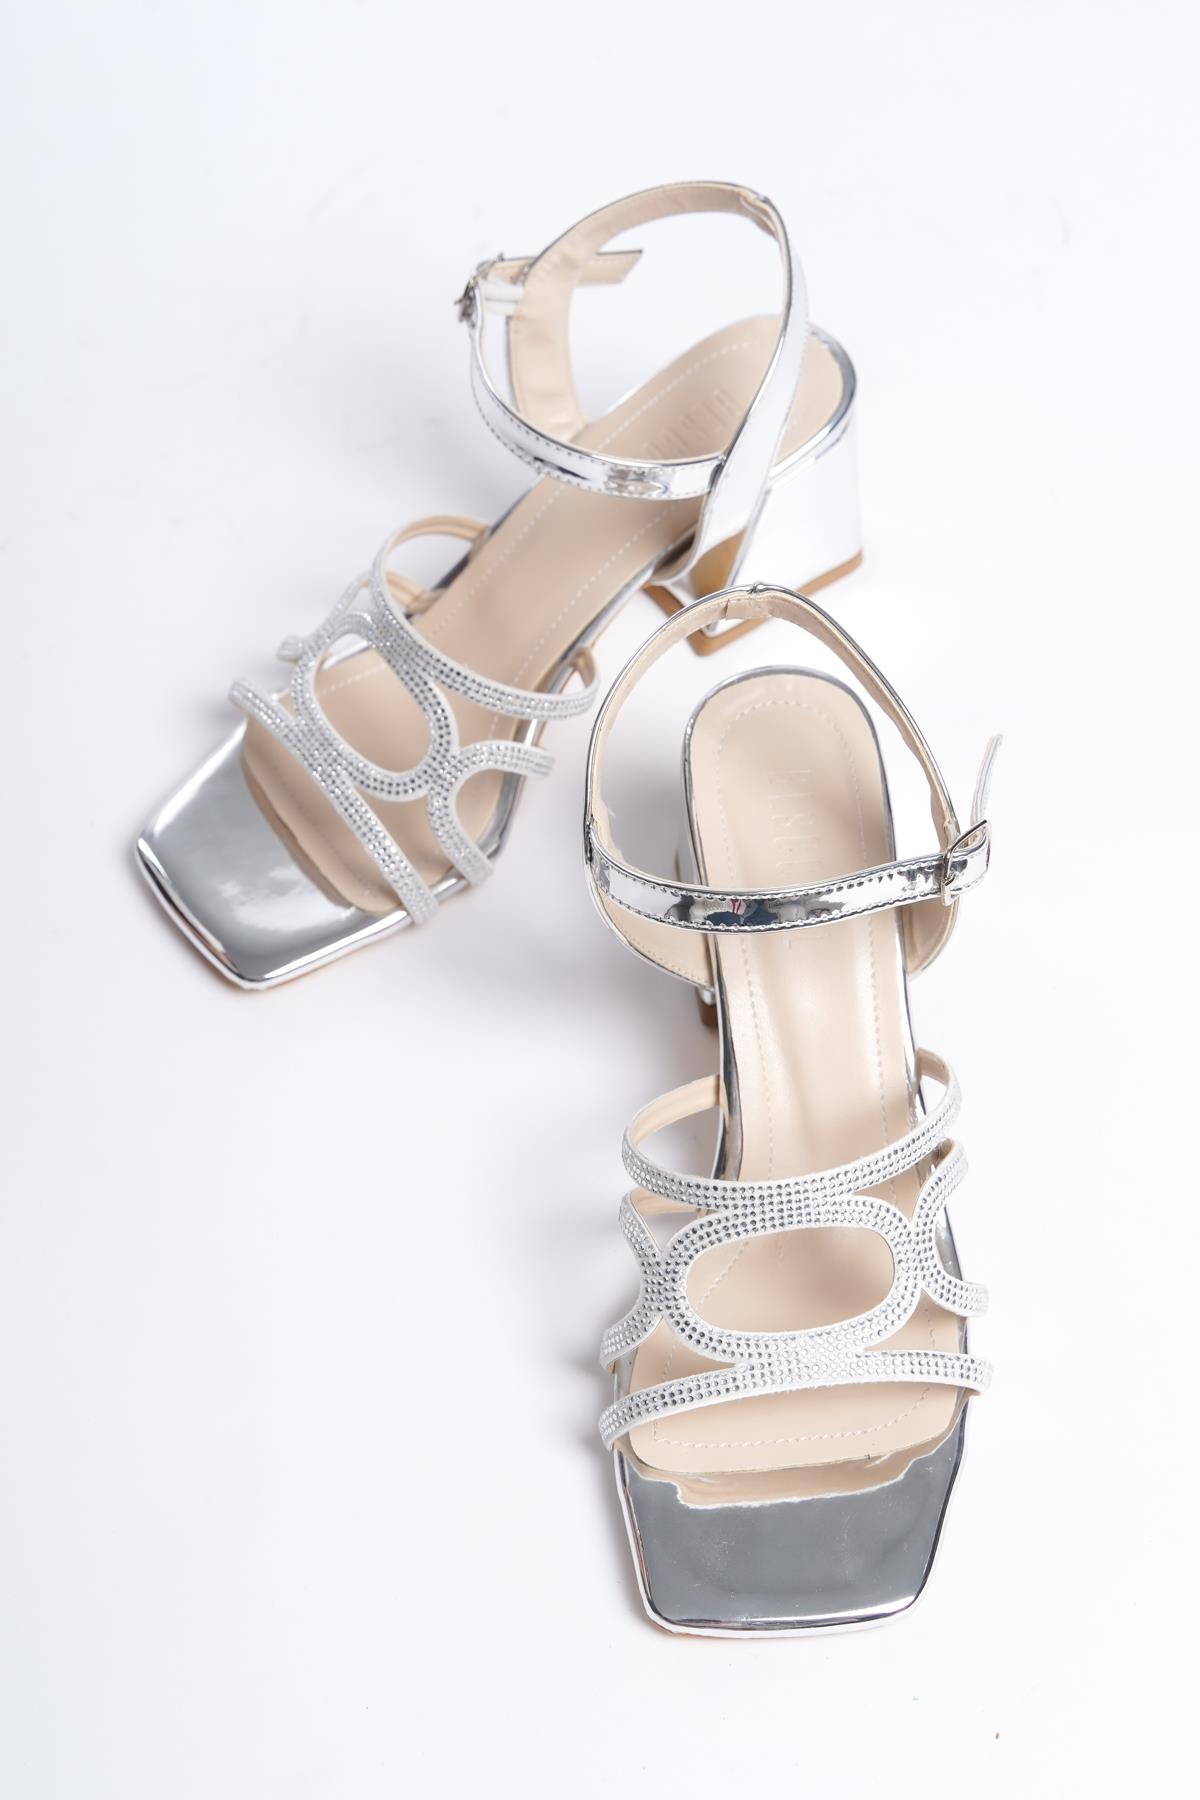 Women's Pedm Silver Low Thick Heel Stone Sandals 5 cm - STREETMODE ™